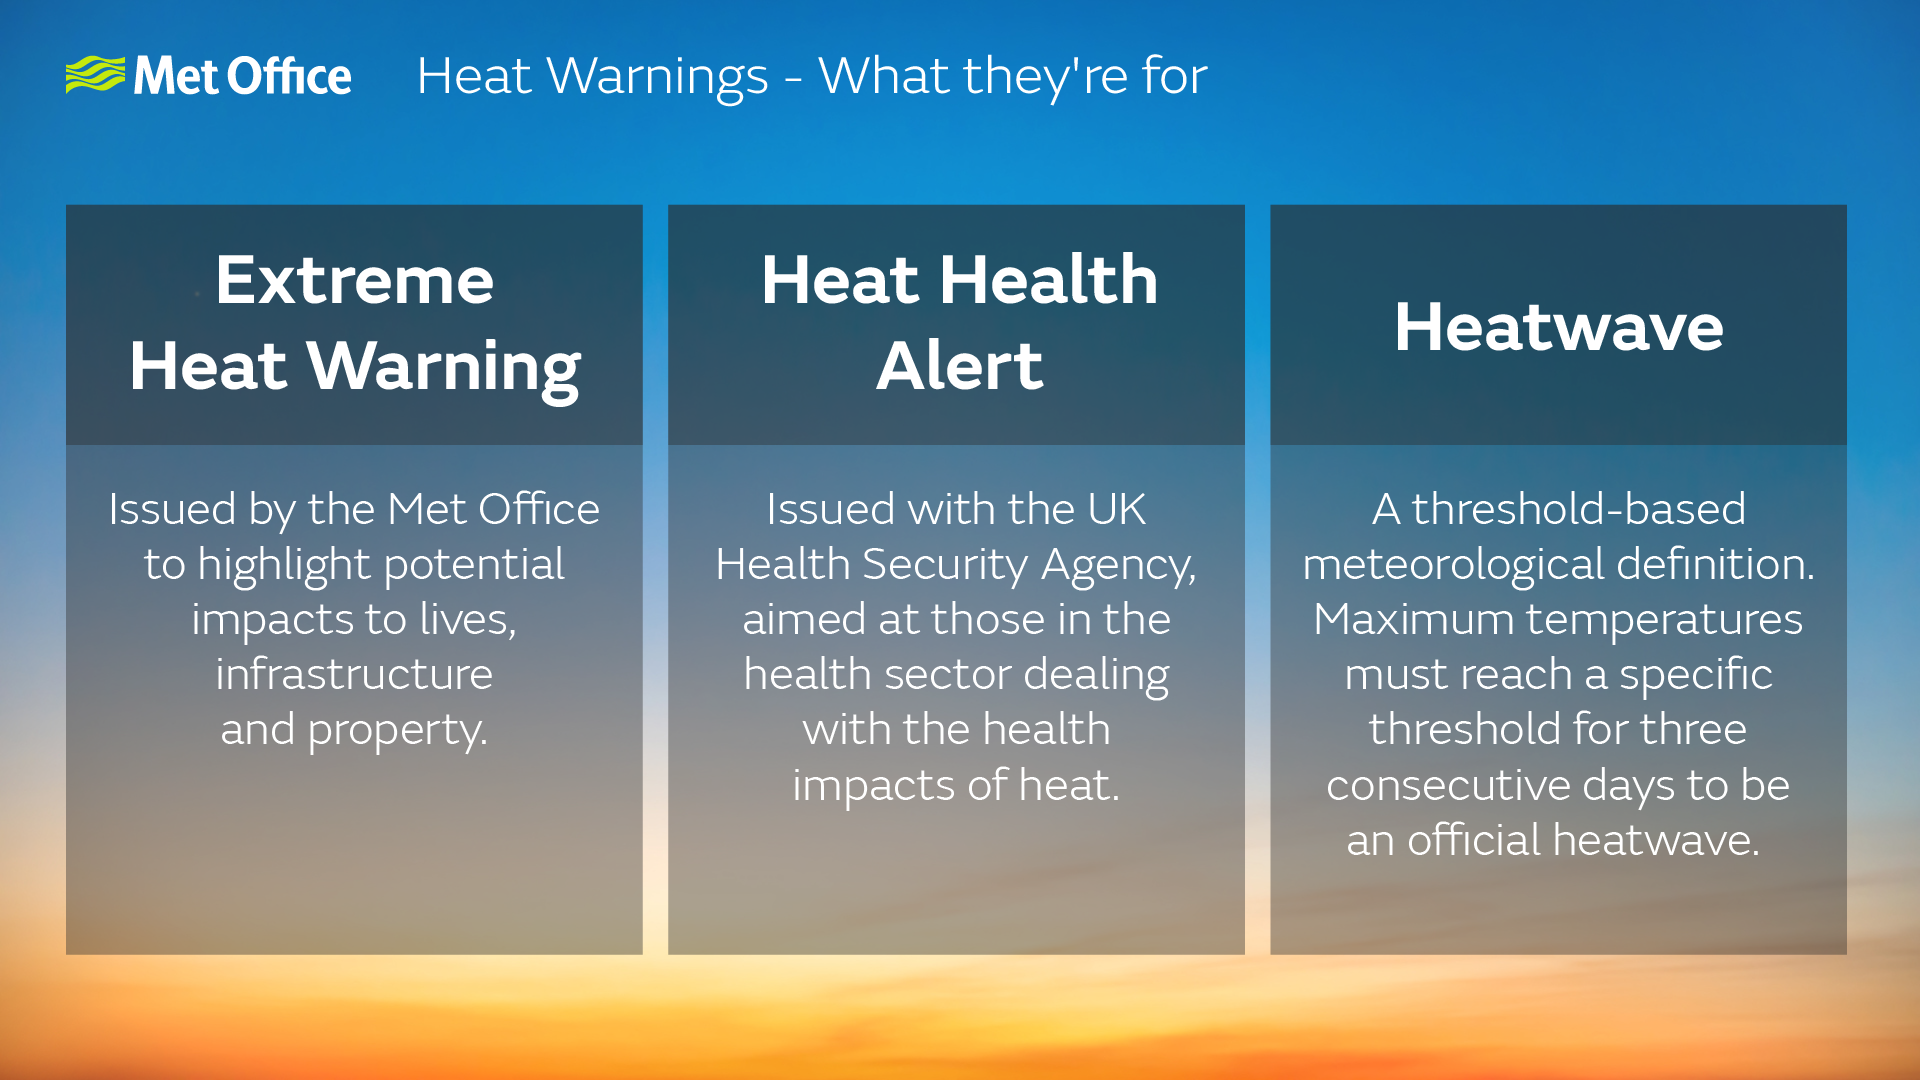 The graphic shows that and the extreme heat warning is a Met Office impact-based warning for the UK.  A Heat Health Alert is issued by the UKHSA with a specific focus on healthcare professionals.  A heatwave is a Met Office definition of where a temperature limit lasting three days must be met.